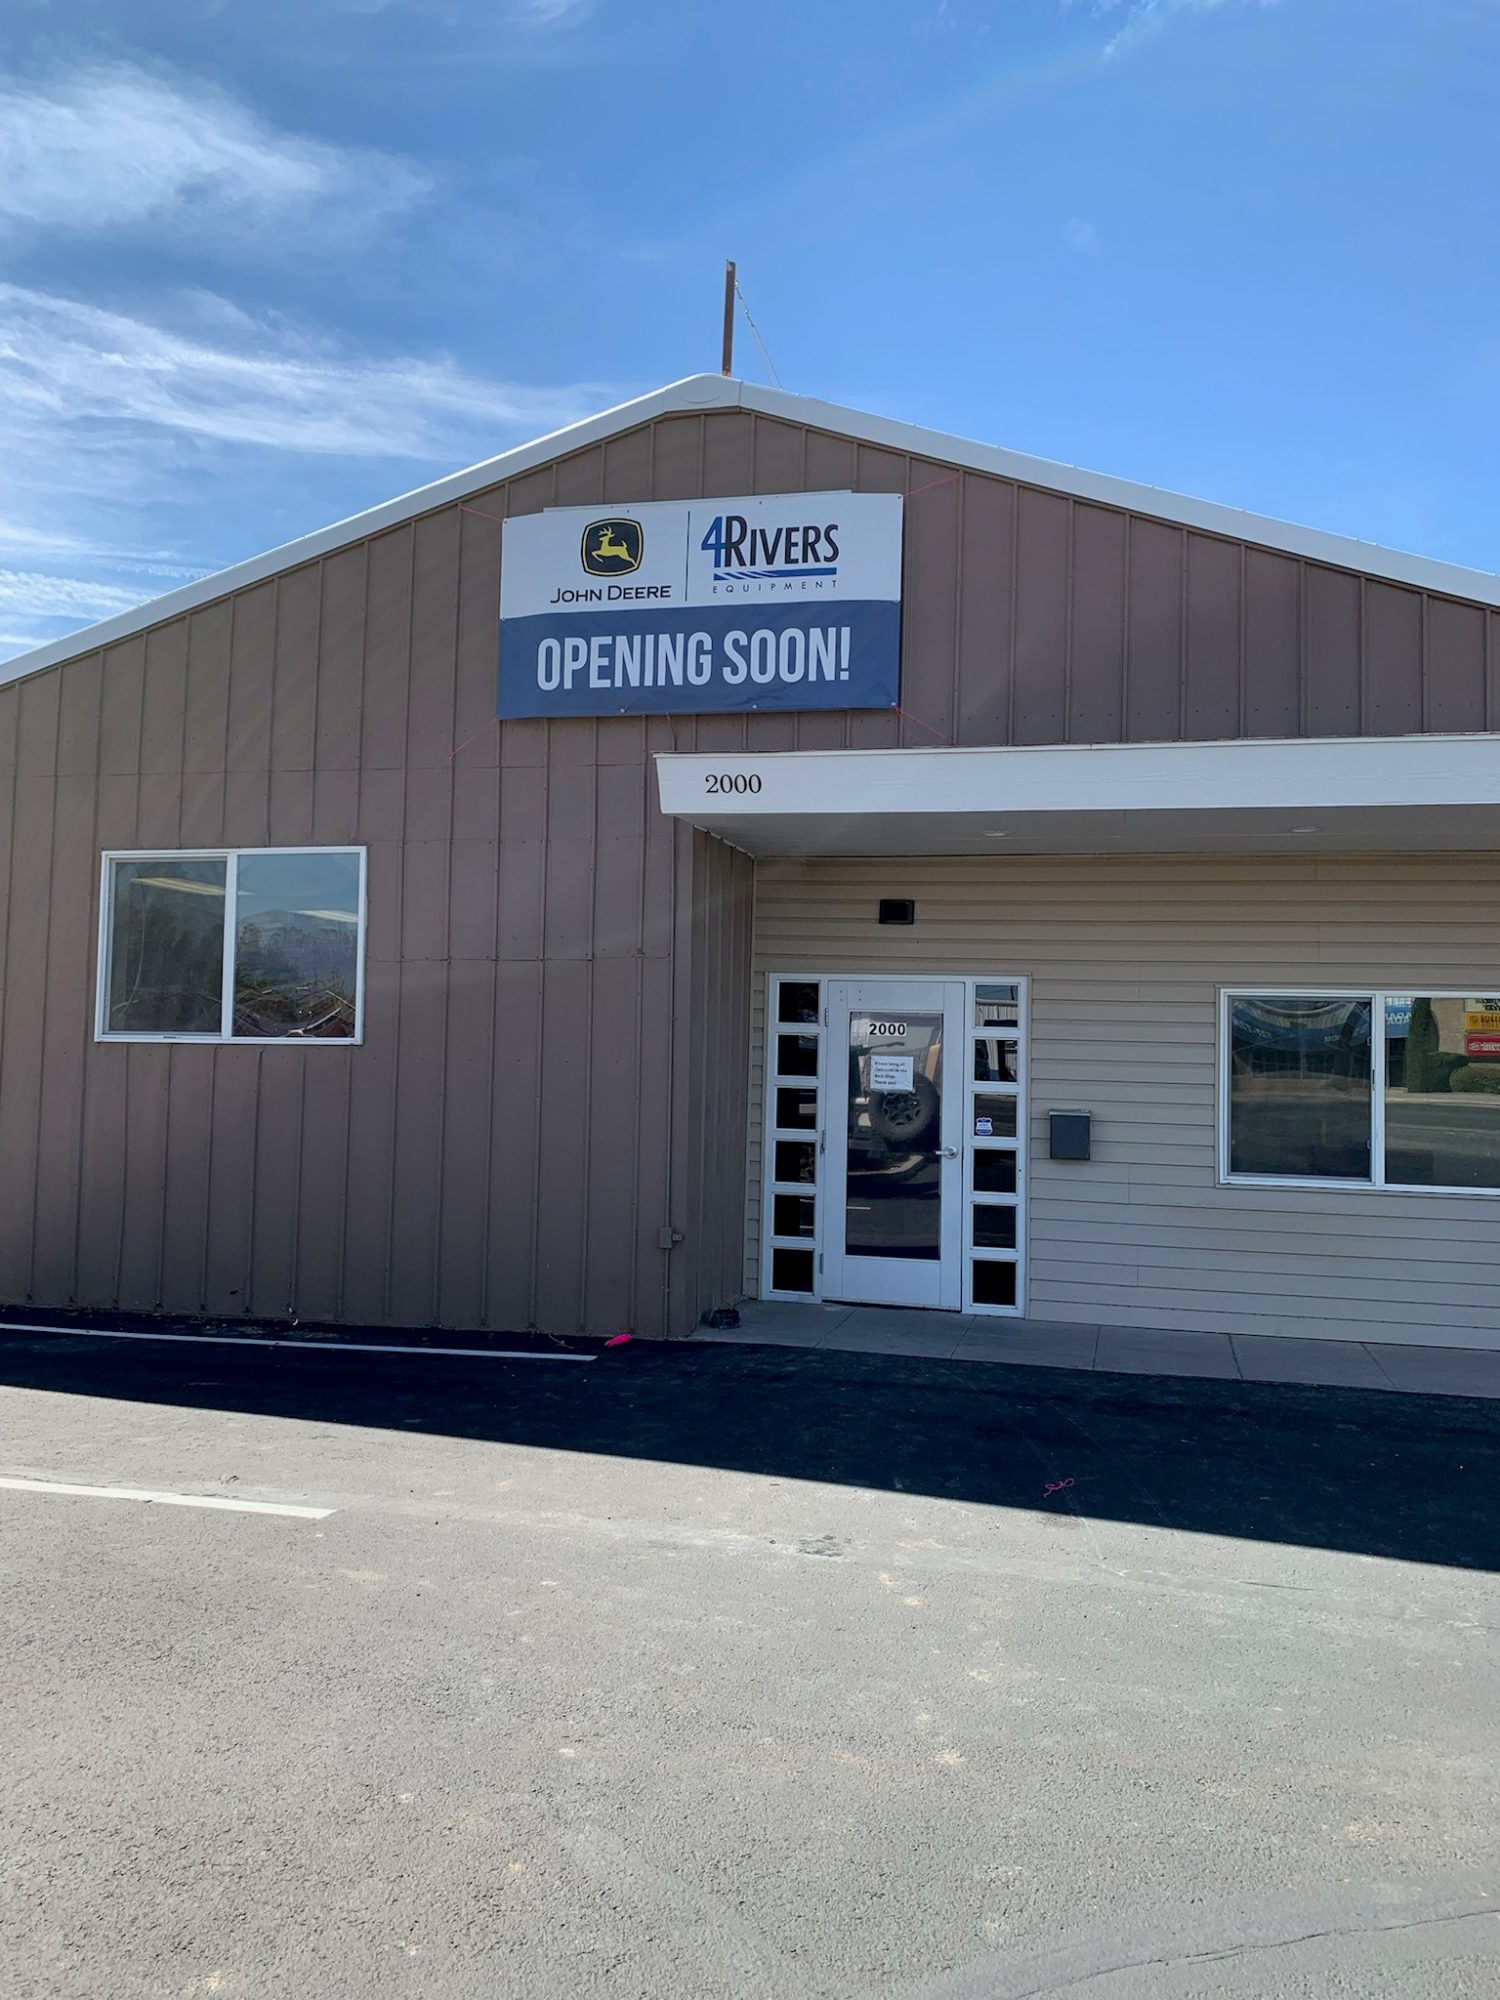 New 4Rivers Parts location in Las Cruces, New Mexico.